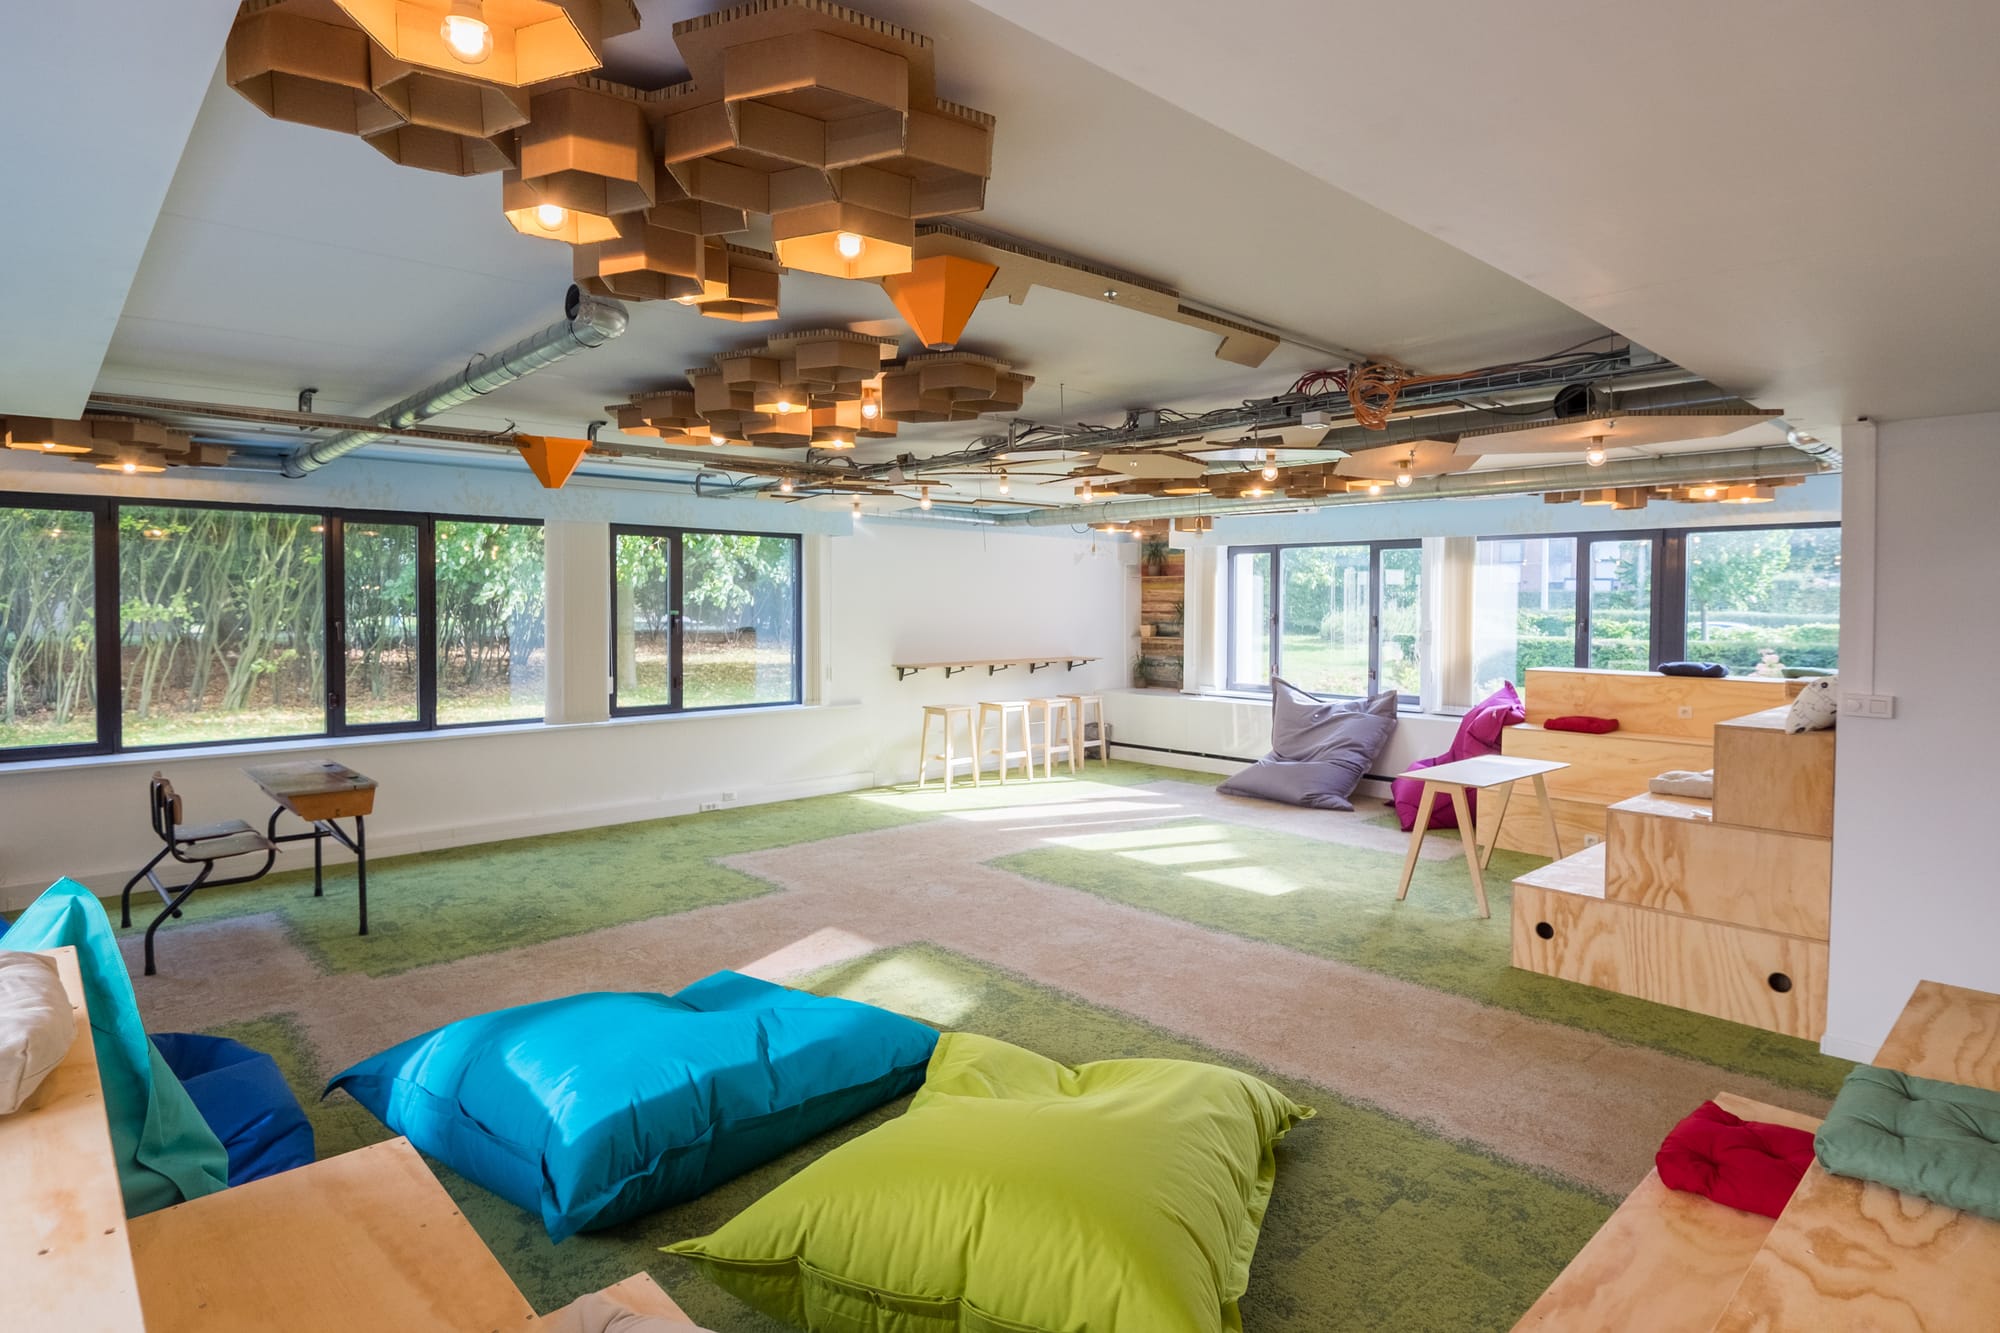 Sustainability In Coworking Spaces: What Are We Talking About in 2024? The Case Study of Transforma Bxl.